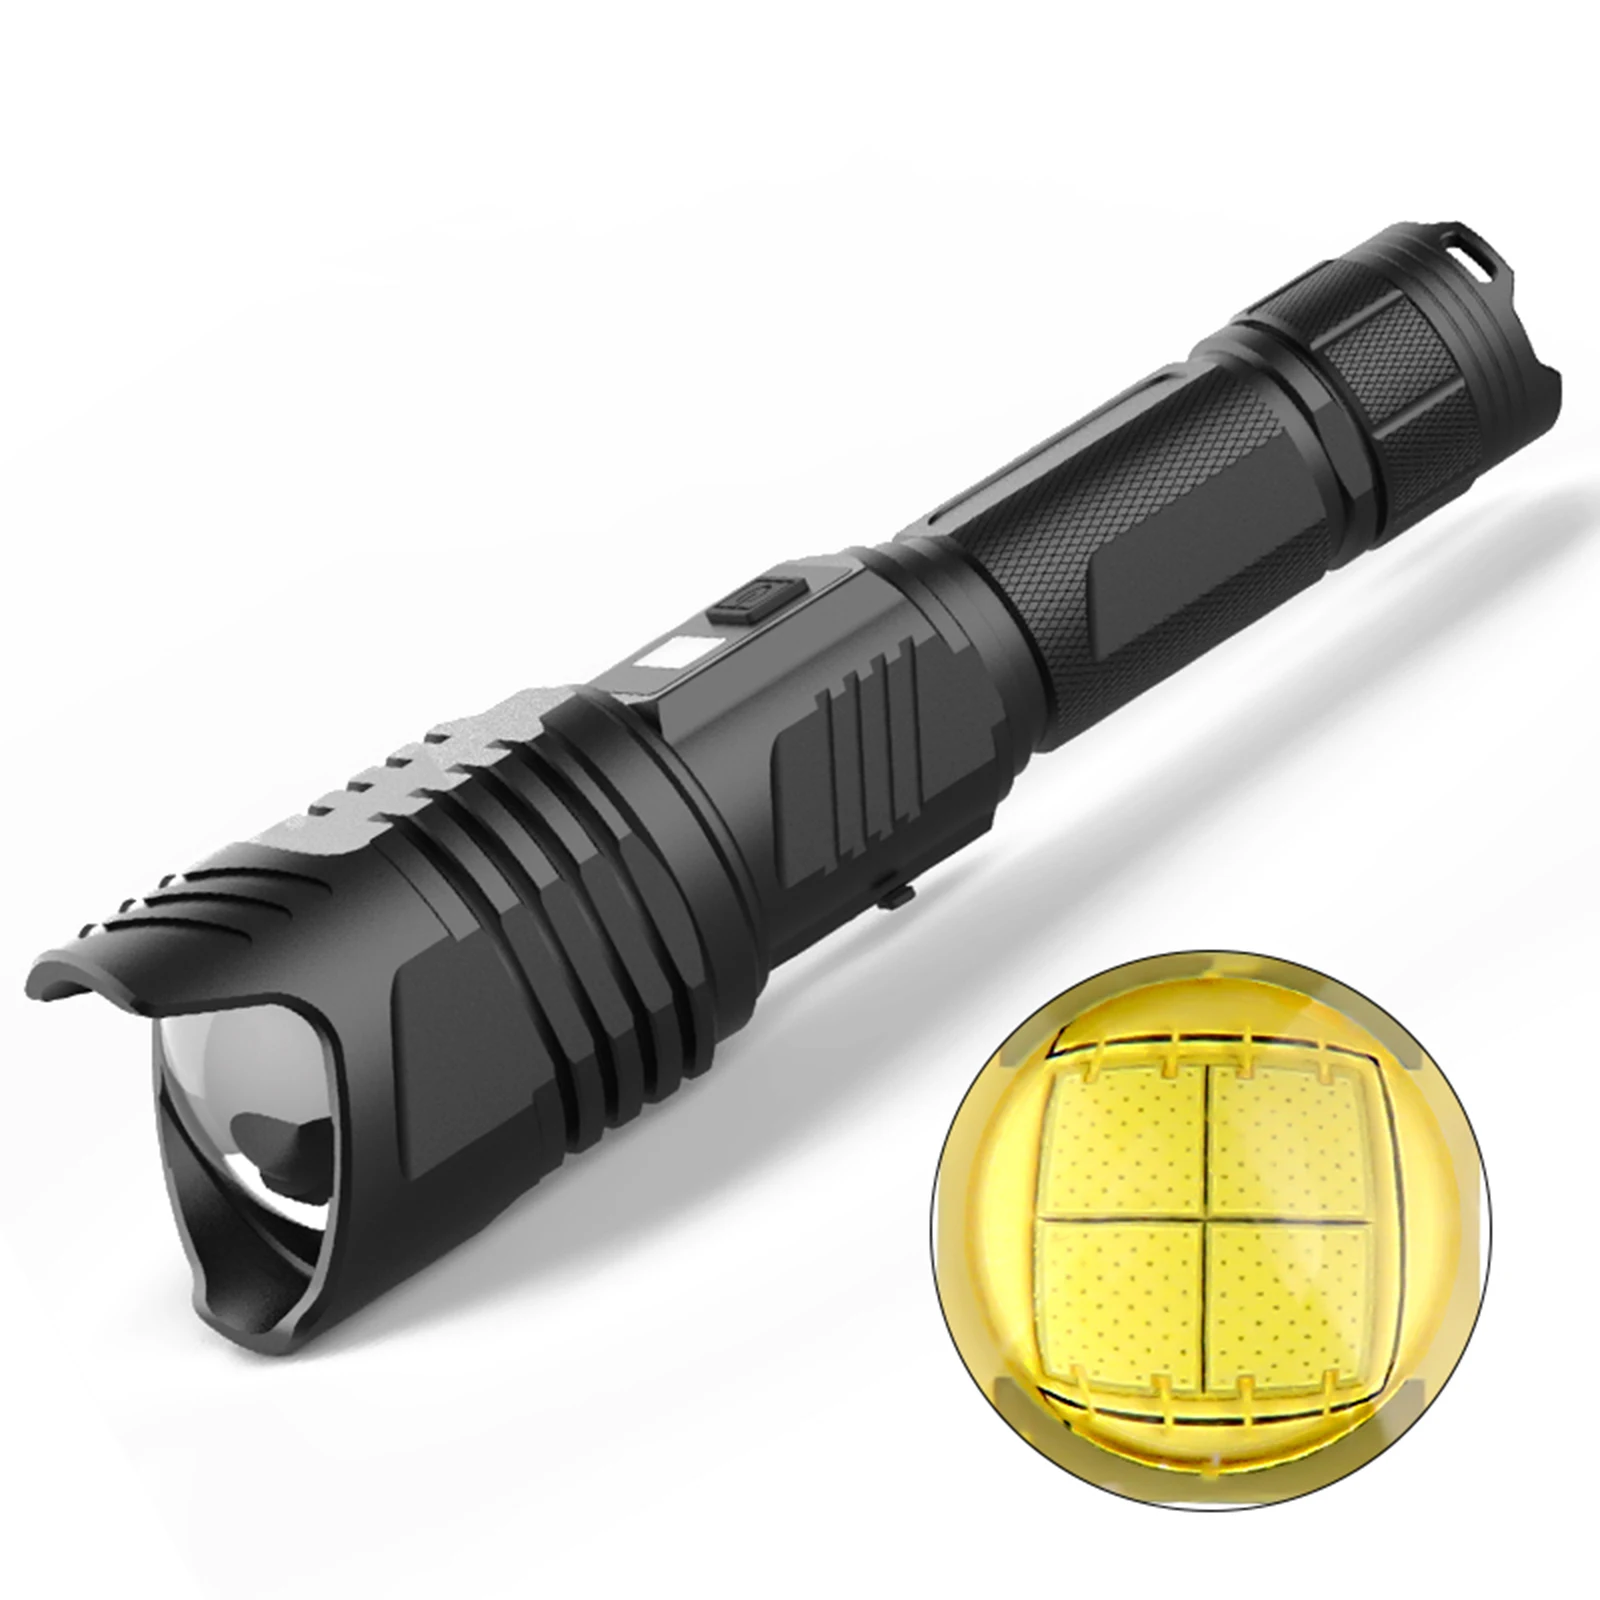 LED Strong Flashlight Rechargeable LED Flashlight With LCD Display Large Wide Angle Lens Strong Light Flashlight Lighting Tools